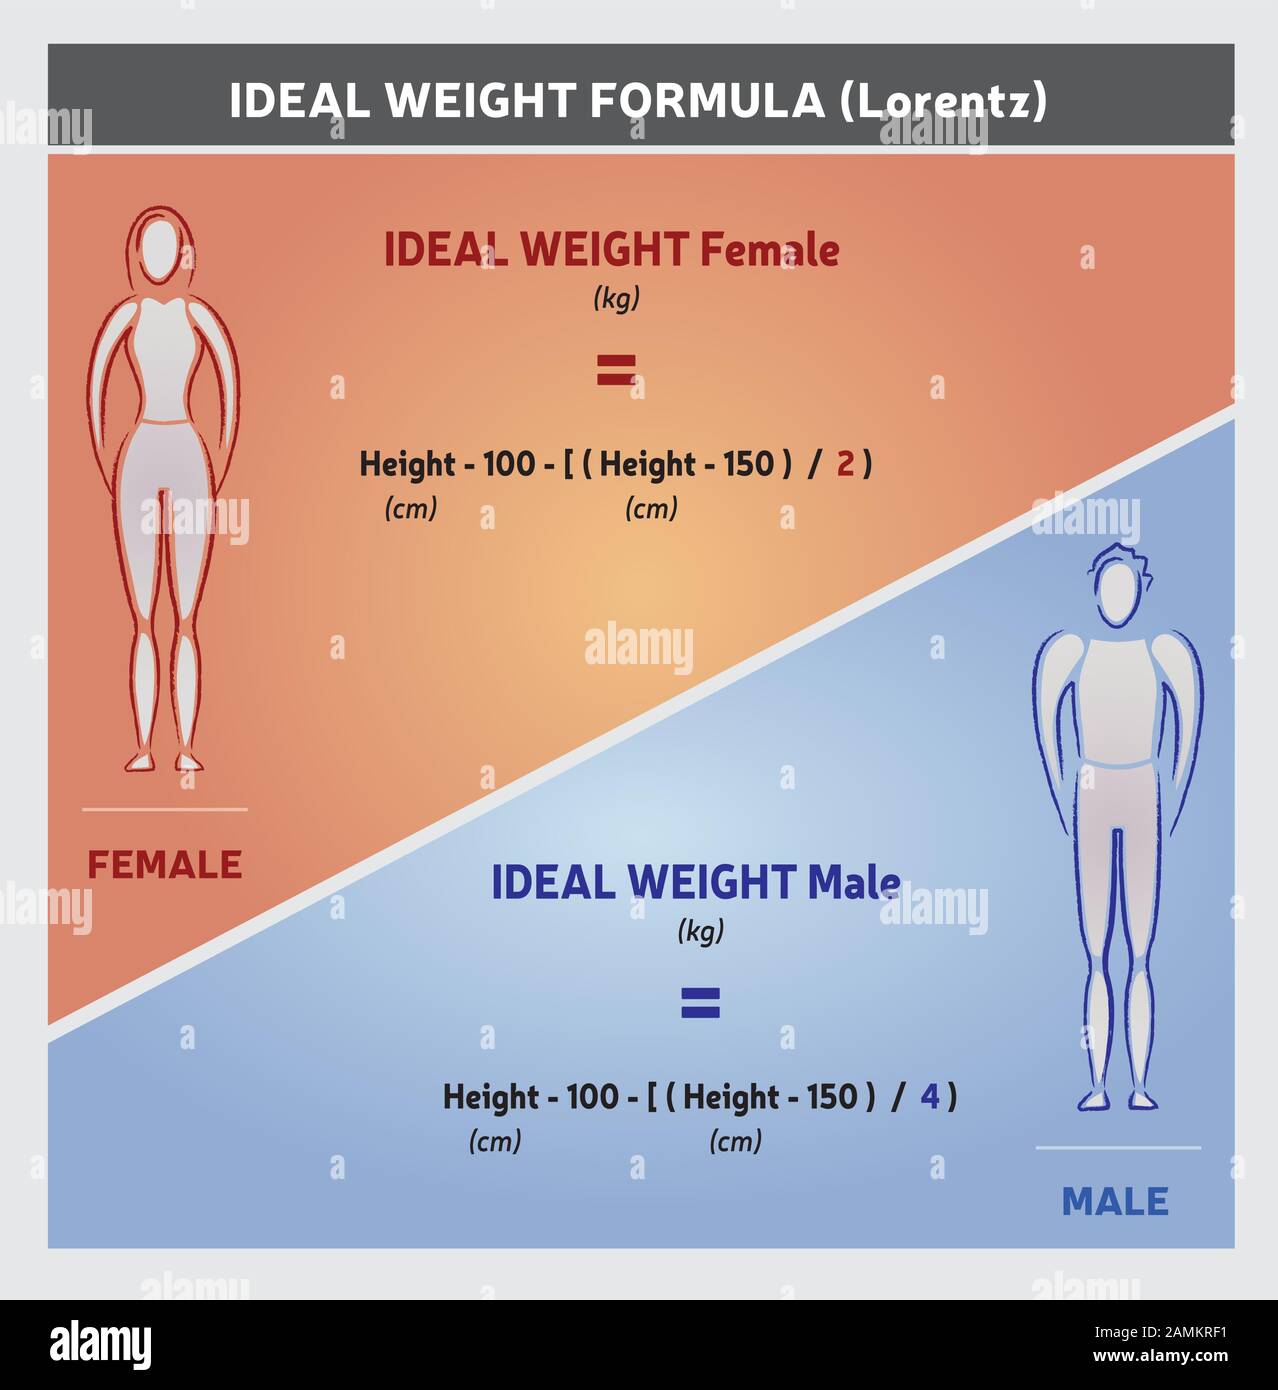 What Is The Ideal Weight